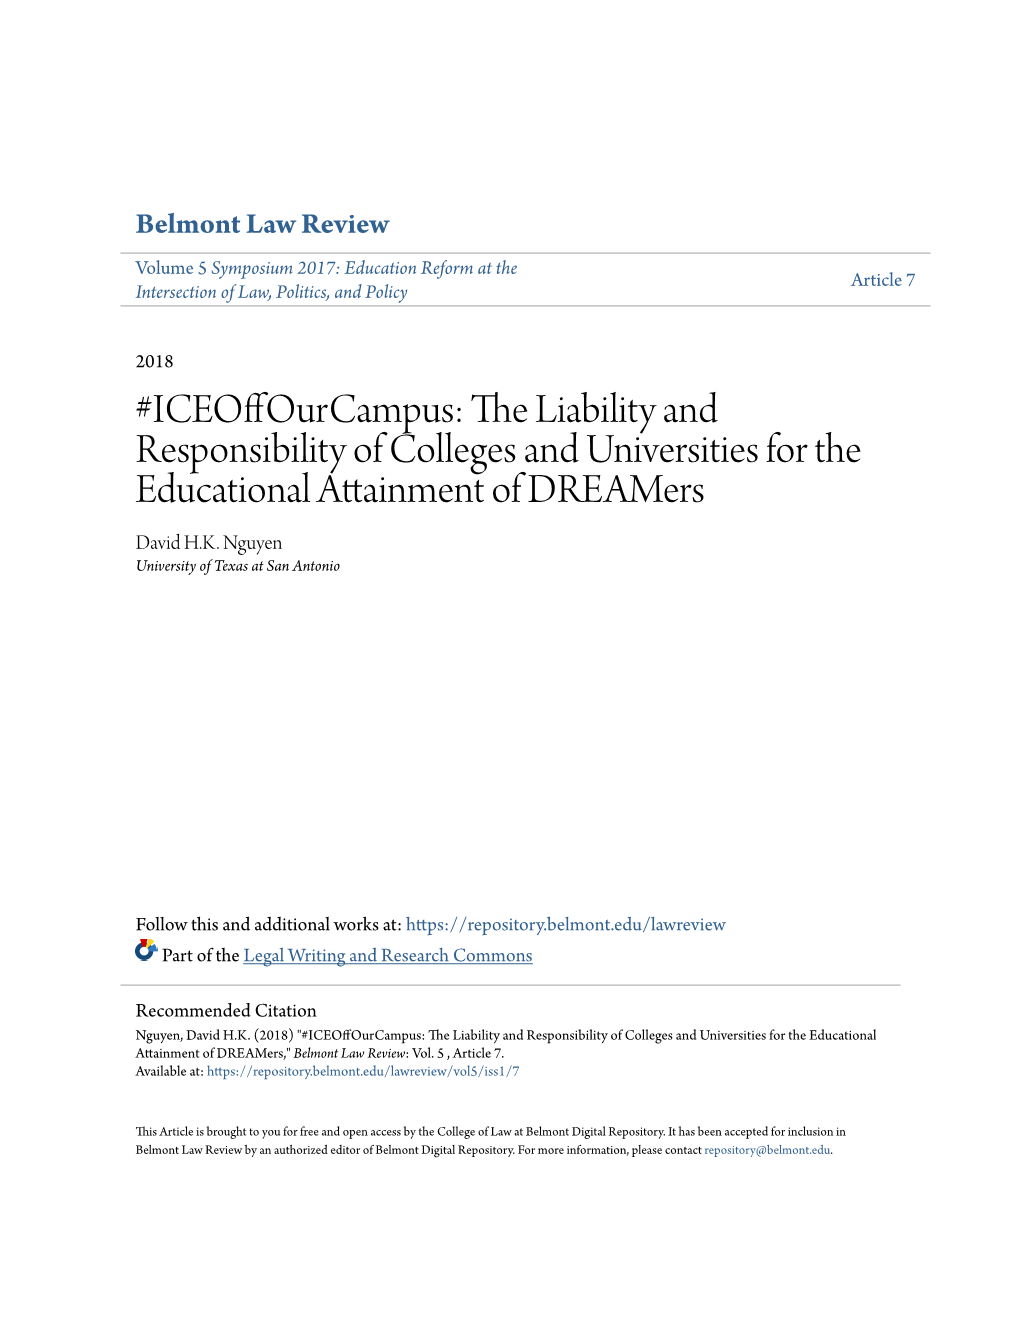 Iceoffourcampus: the Liability and Responsibility of Colleges and Universities for the Educational Attainment of Dreamers David H.K